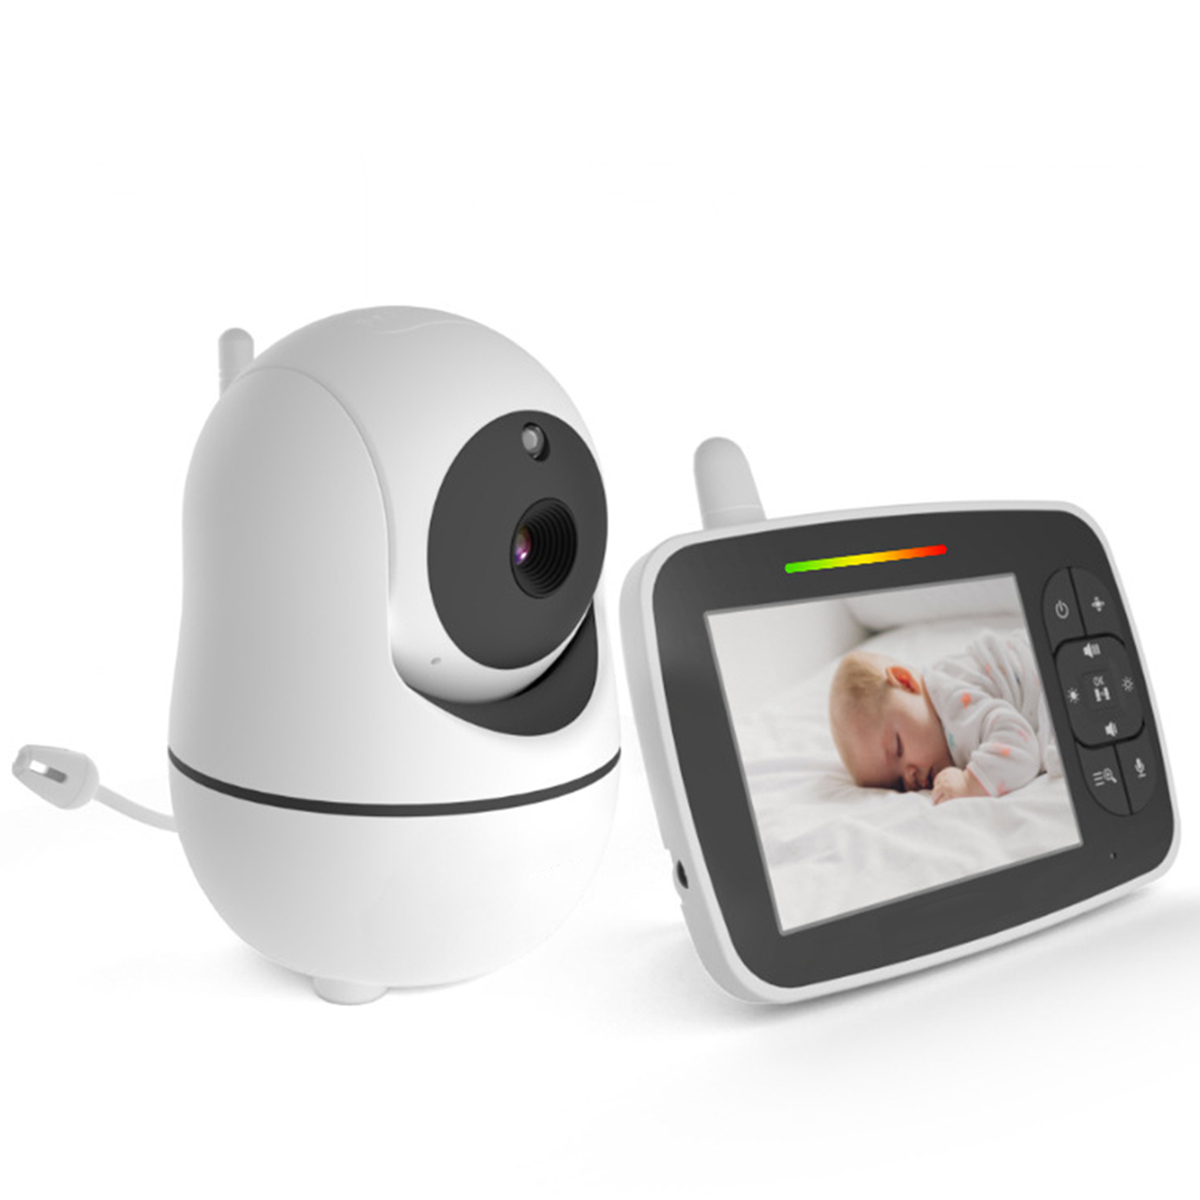 Baby monitor with camera 2.4Ghz 3.5-inch LCD digital screen and night vision camera,Dual-intercom function sound activate 2